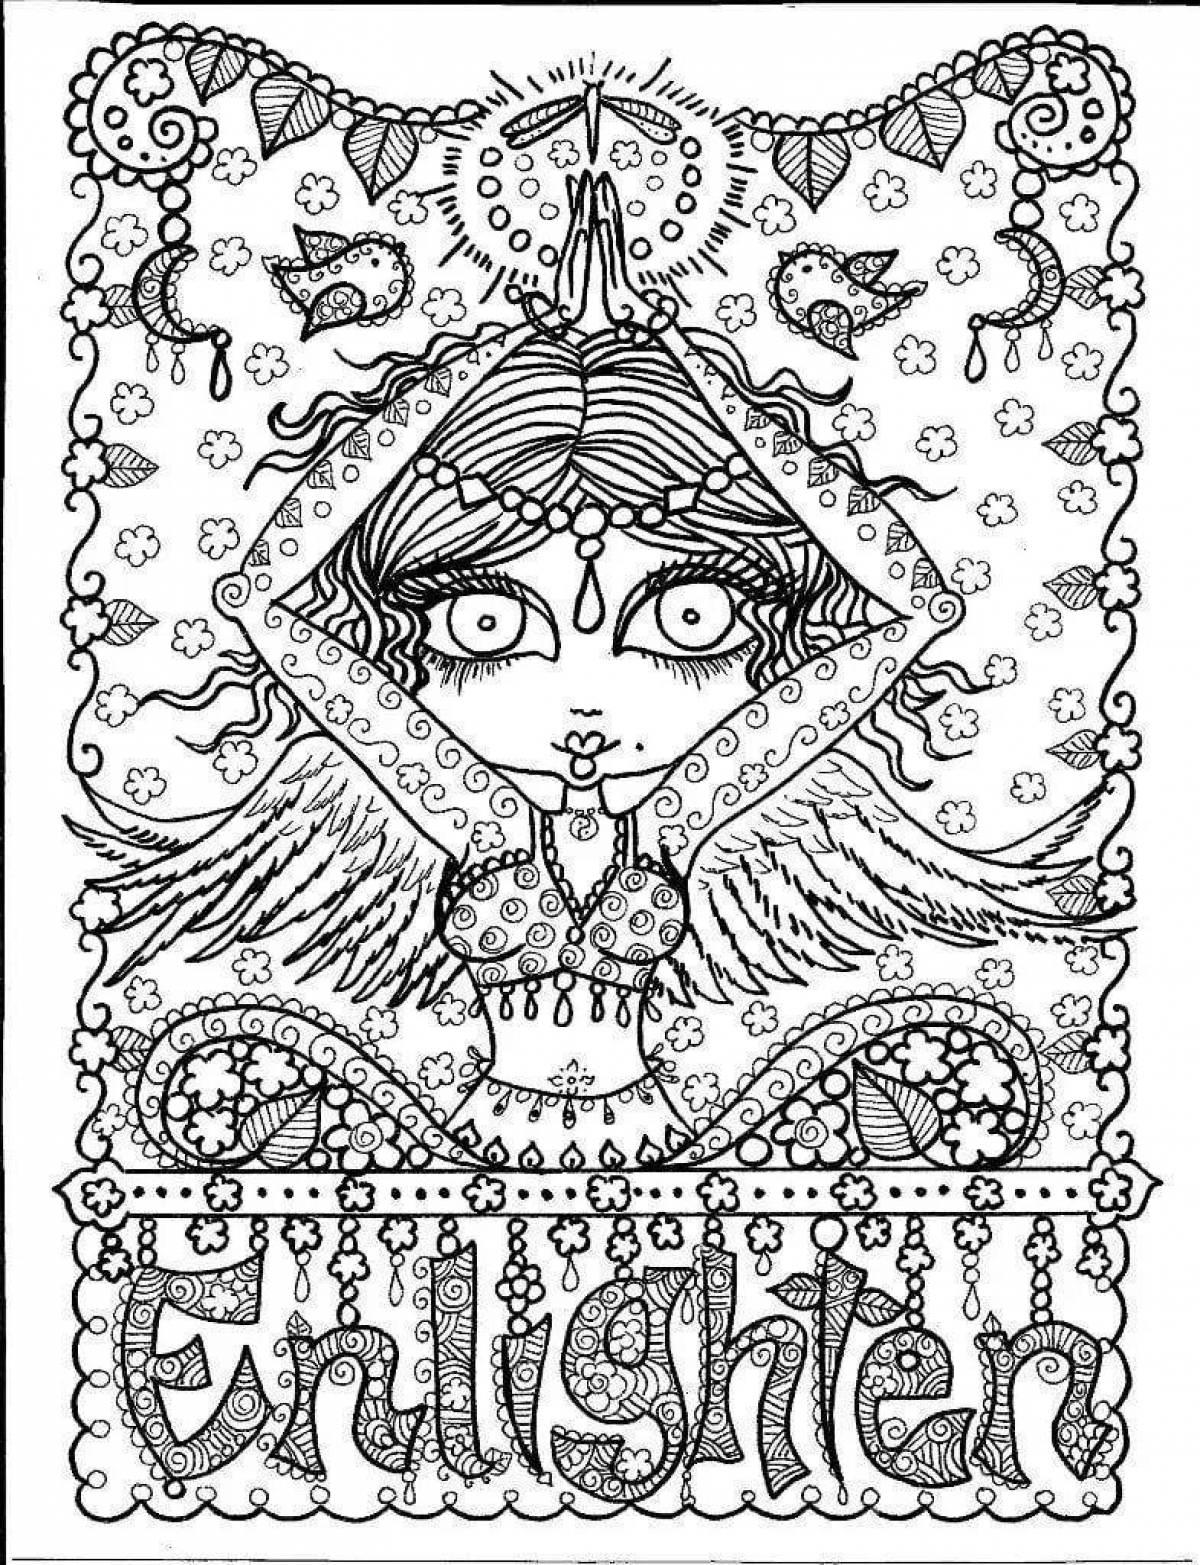 Exciting coloring art yoga